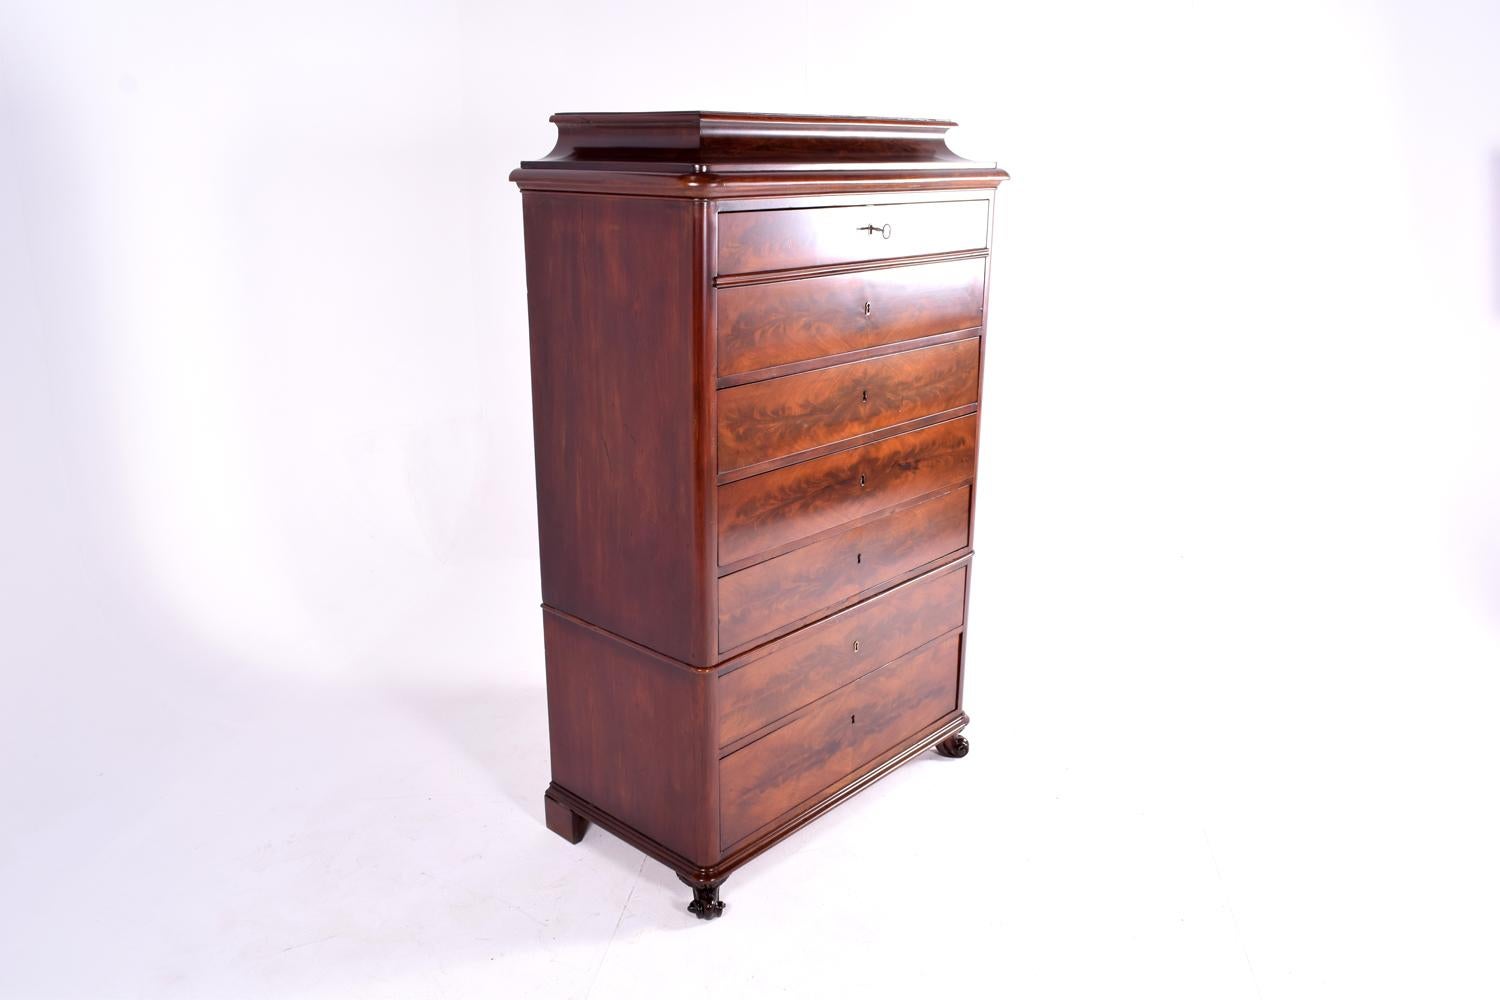 Danish Mid-19th Century Biedermeier Commode Tall Chest of Drawers 9